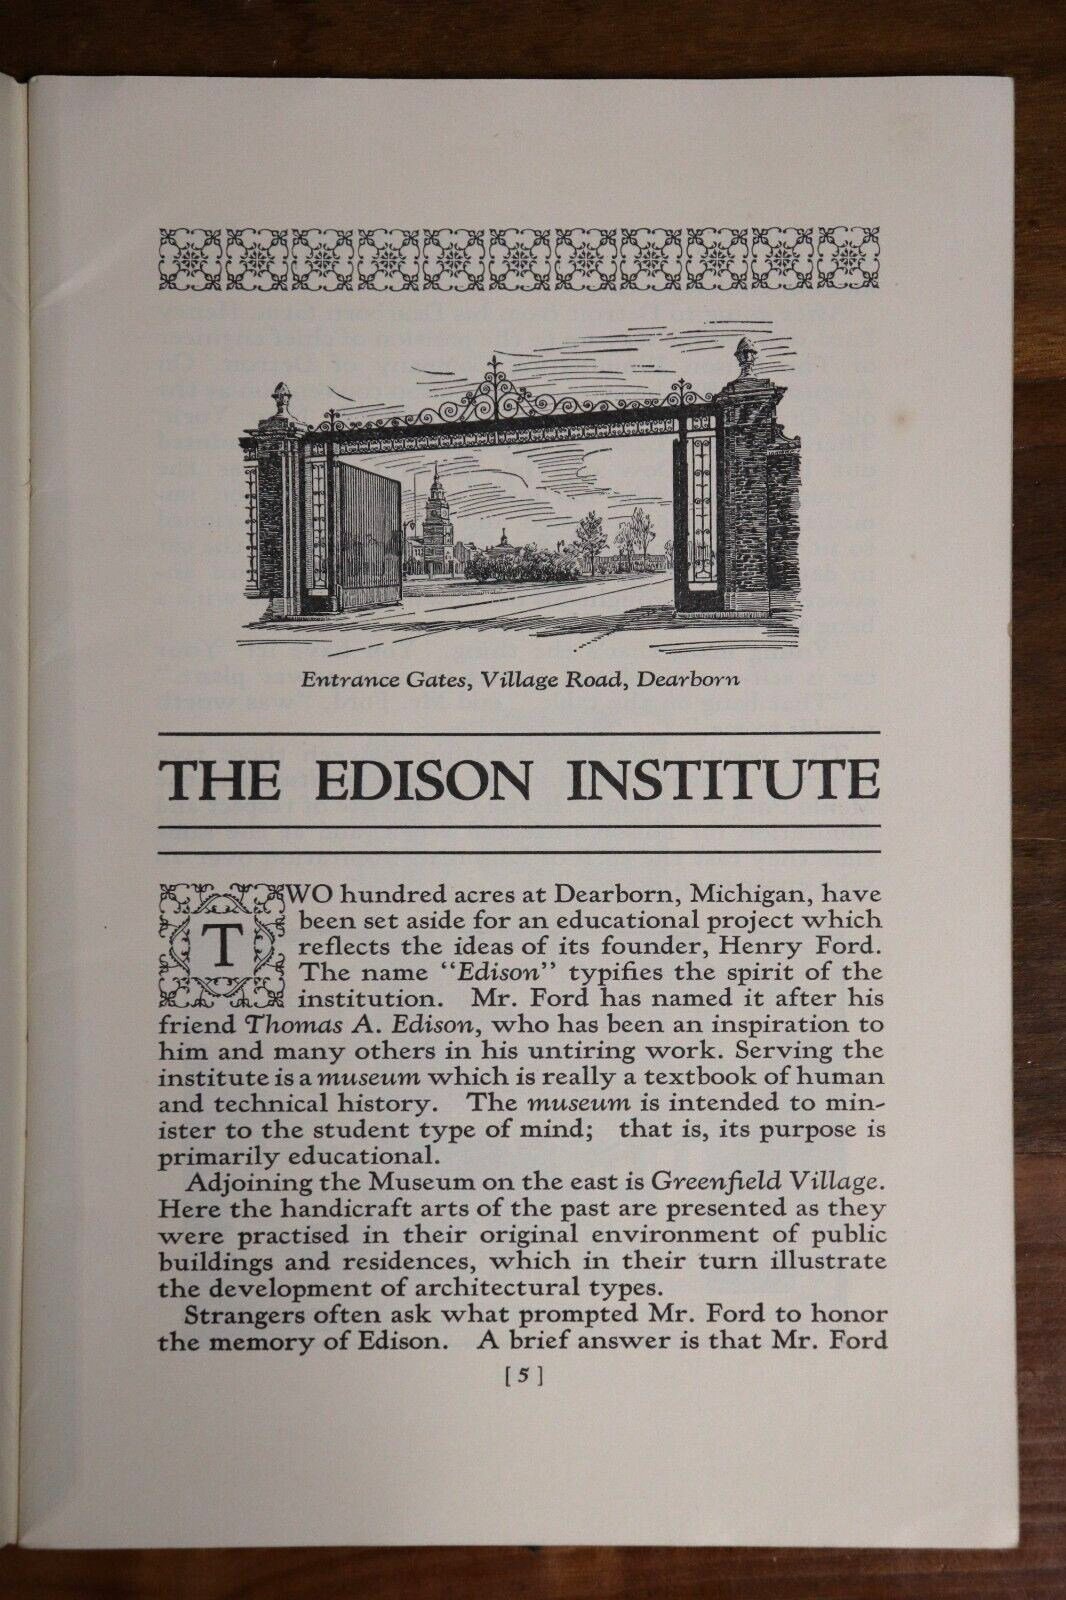 A Guide Book For The Edison Institute Museum - 1941 - American History Book